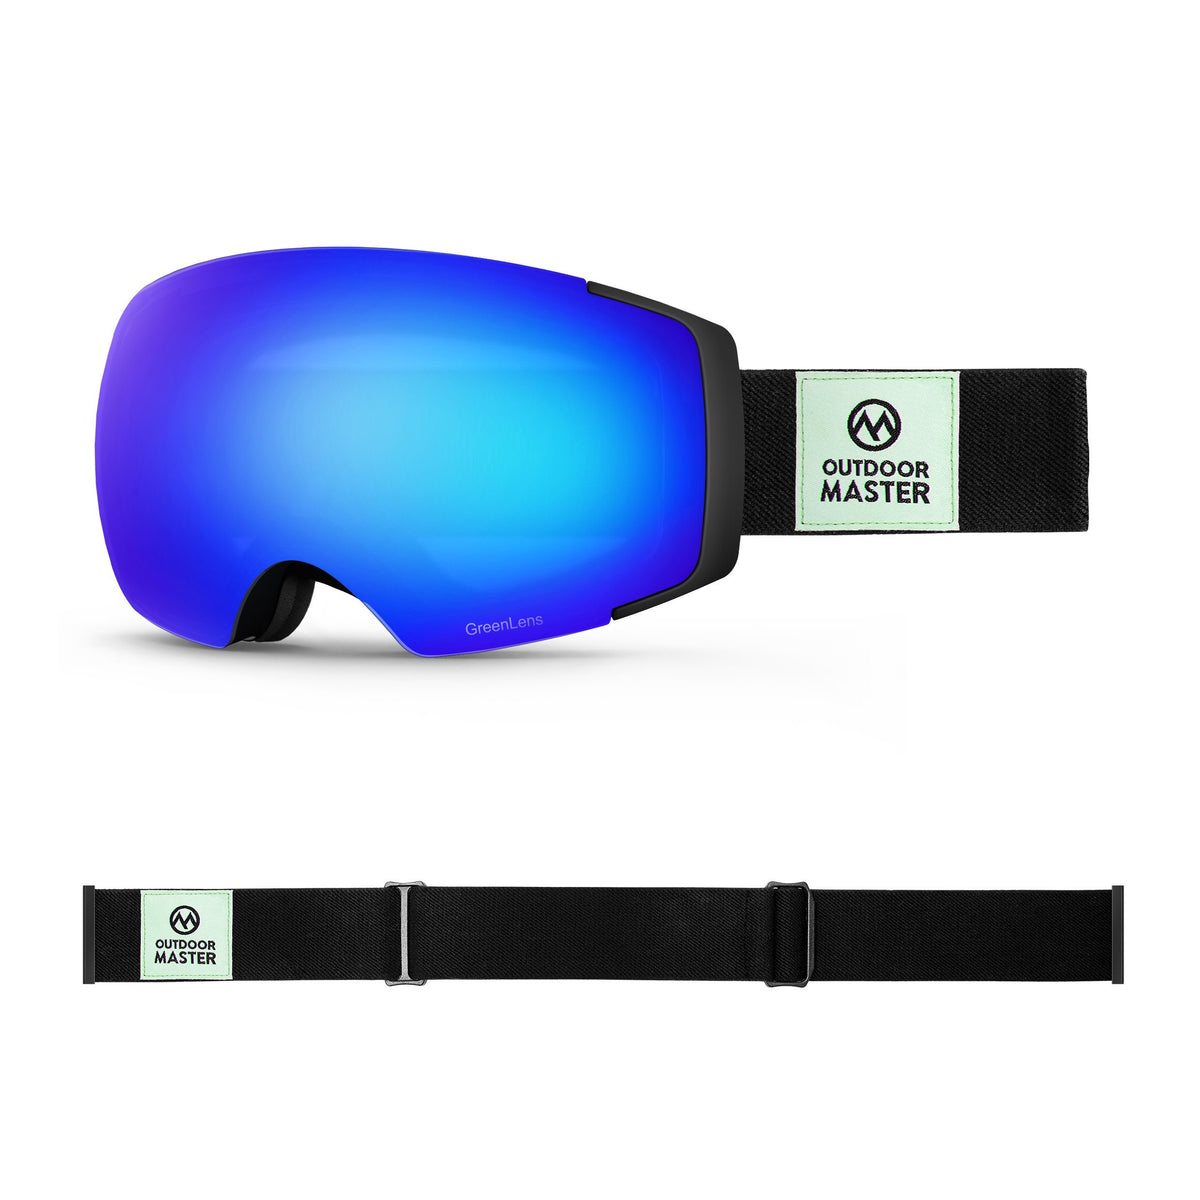 Eco-friendly Ski Goggles Pro Series - The Disappearing Places/Classic BambooStraps Limited Edition OutdoorMaster GreenLens VLT 15% TAC Grey with REVO Blue Polarized Classic BambooStraps